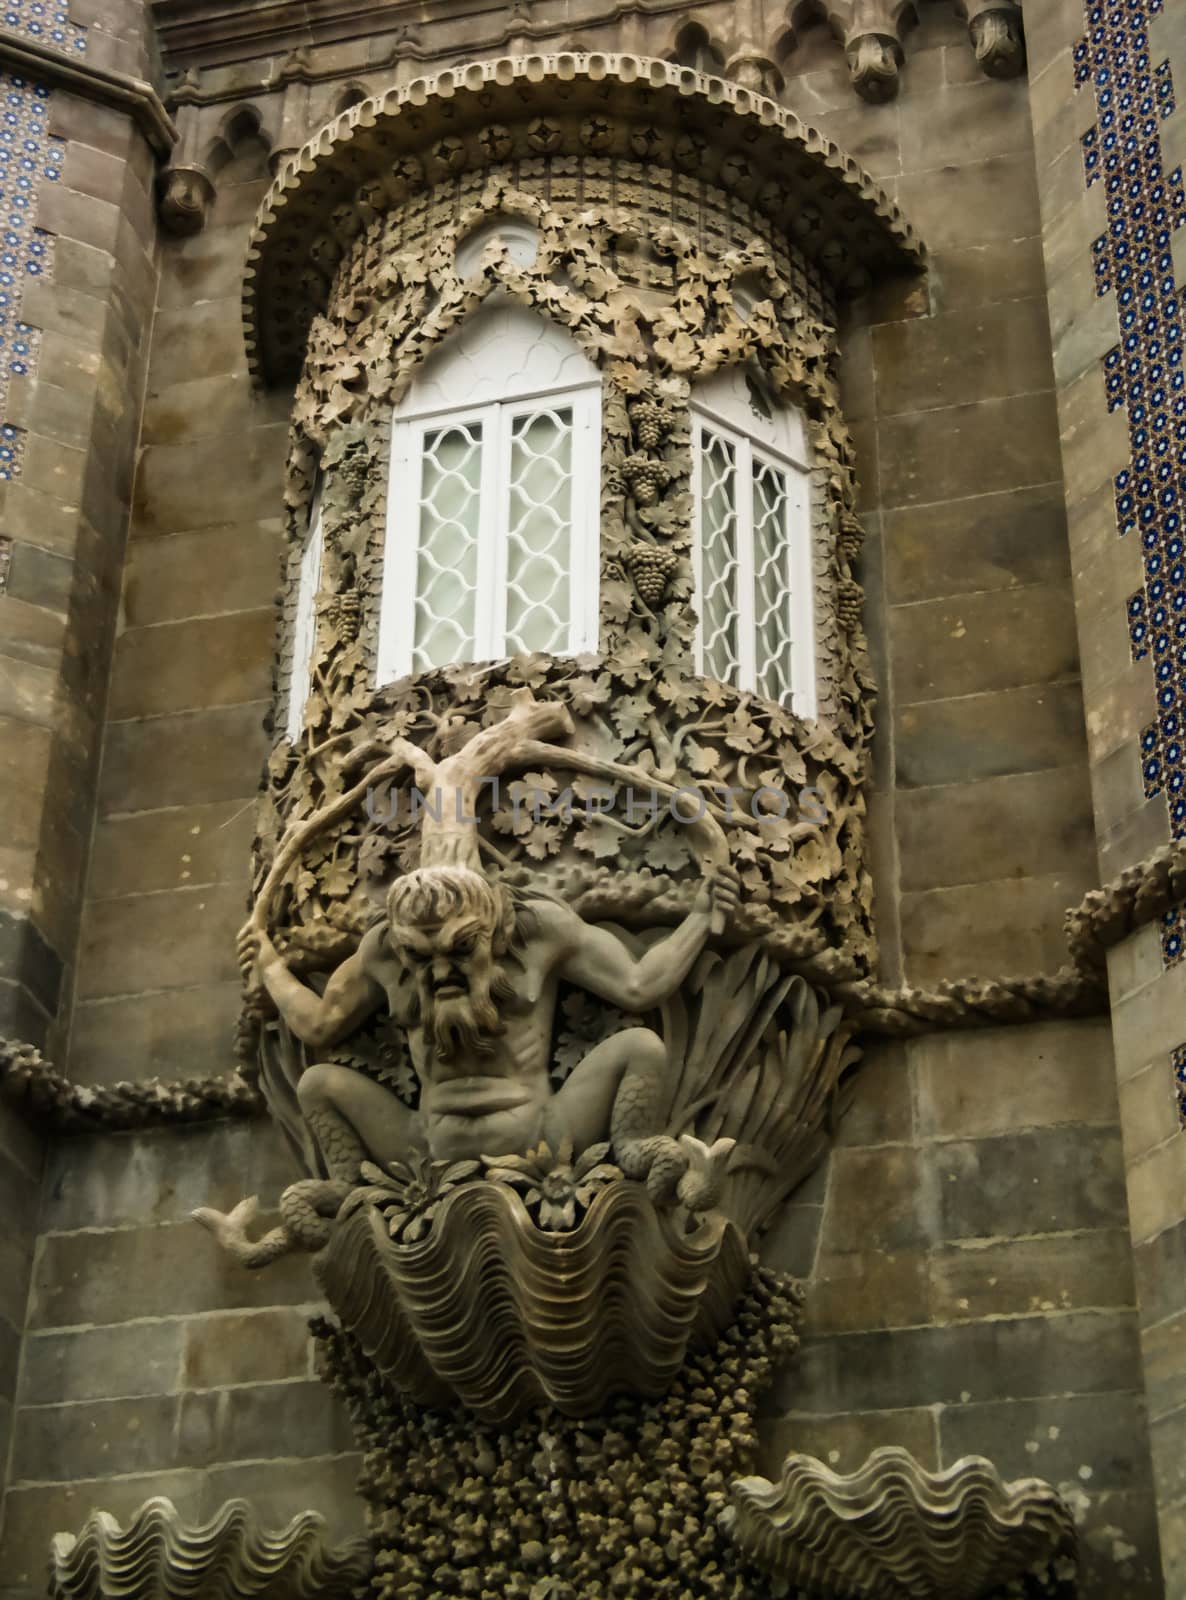 The depiction of a mythological triton in Pena palace, Sintra, Portugal by homocosmicos